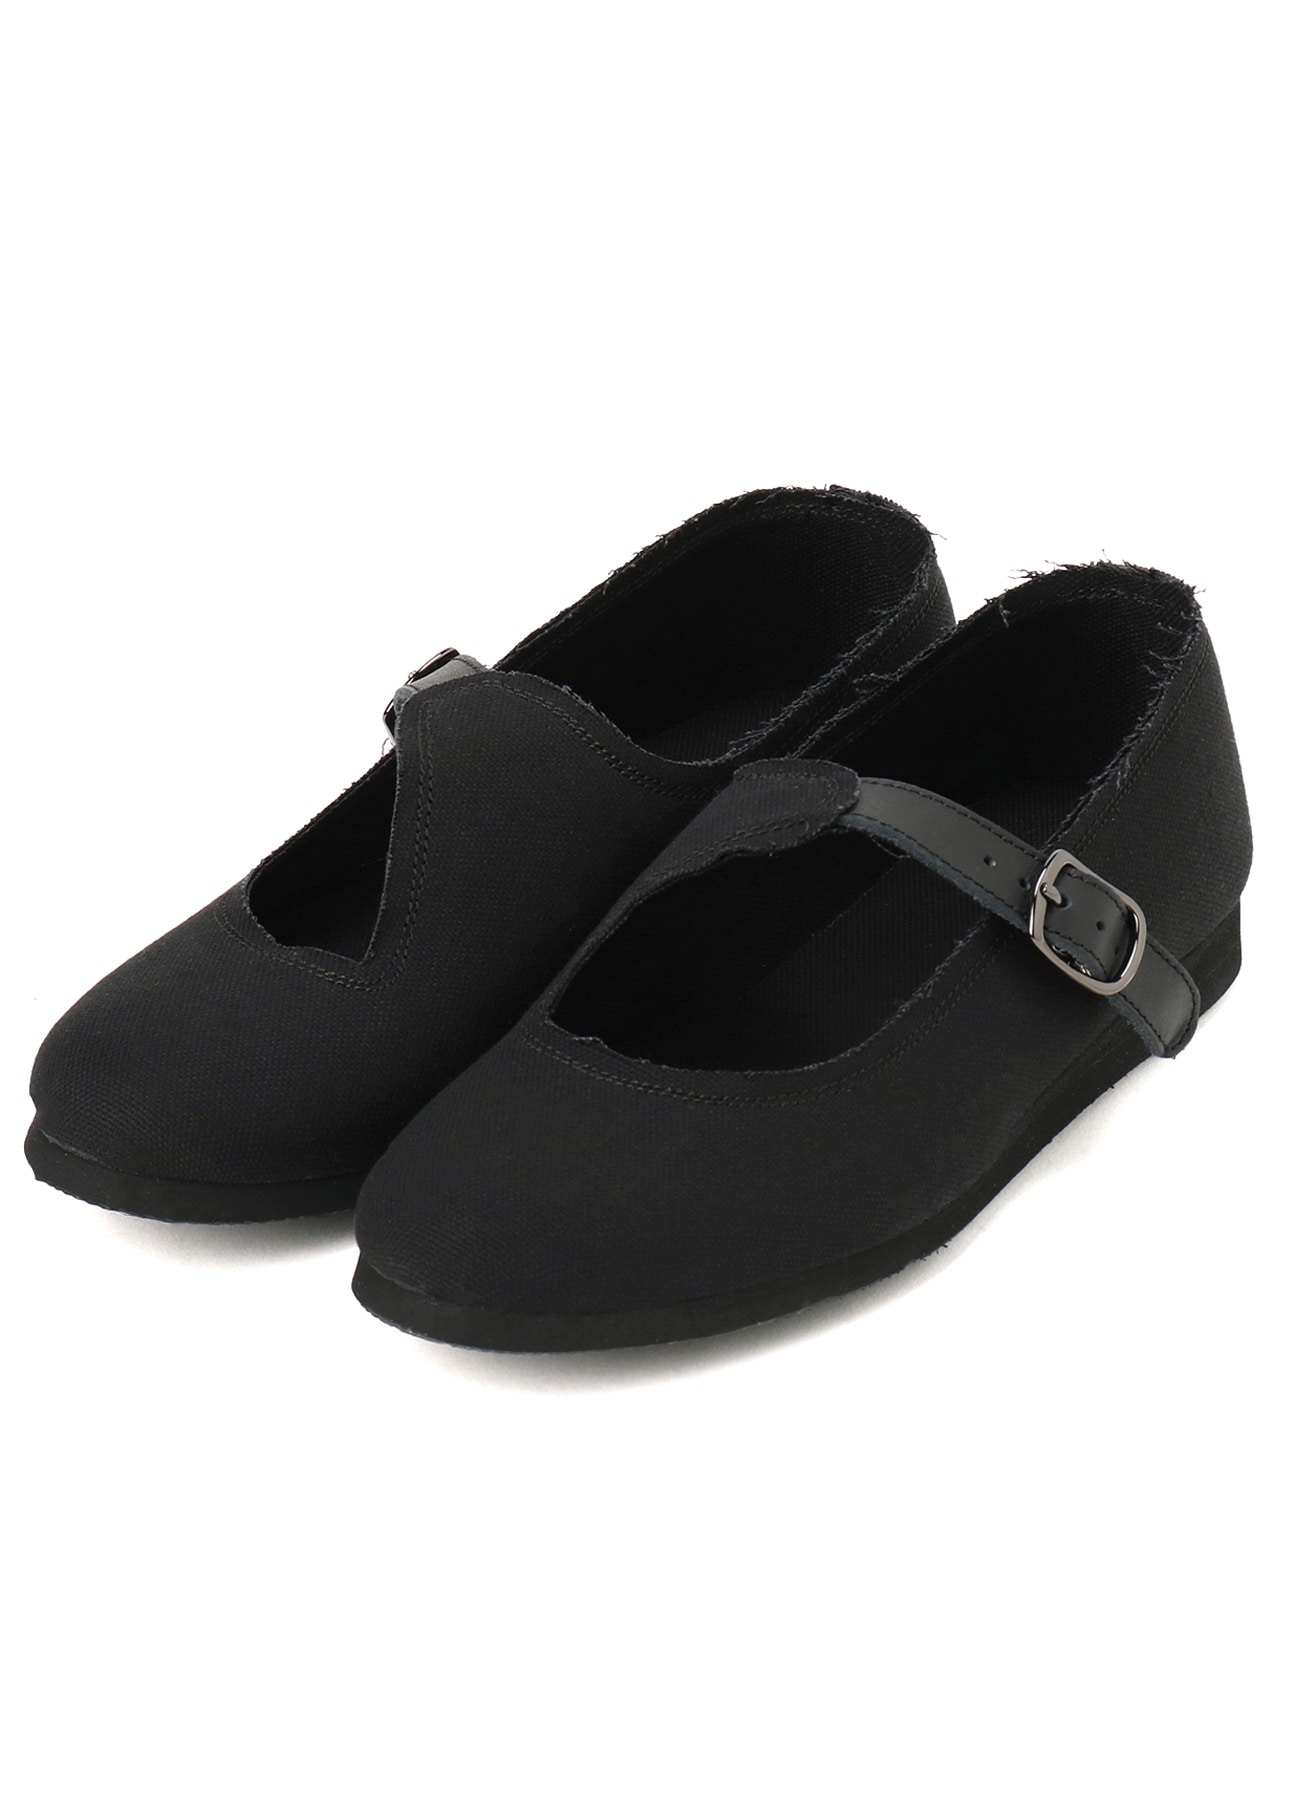 10/OXFORD MARY JANE SHOES